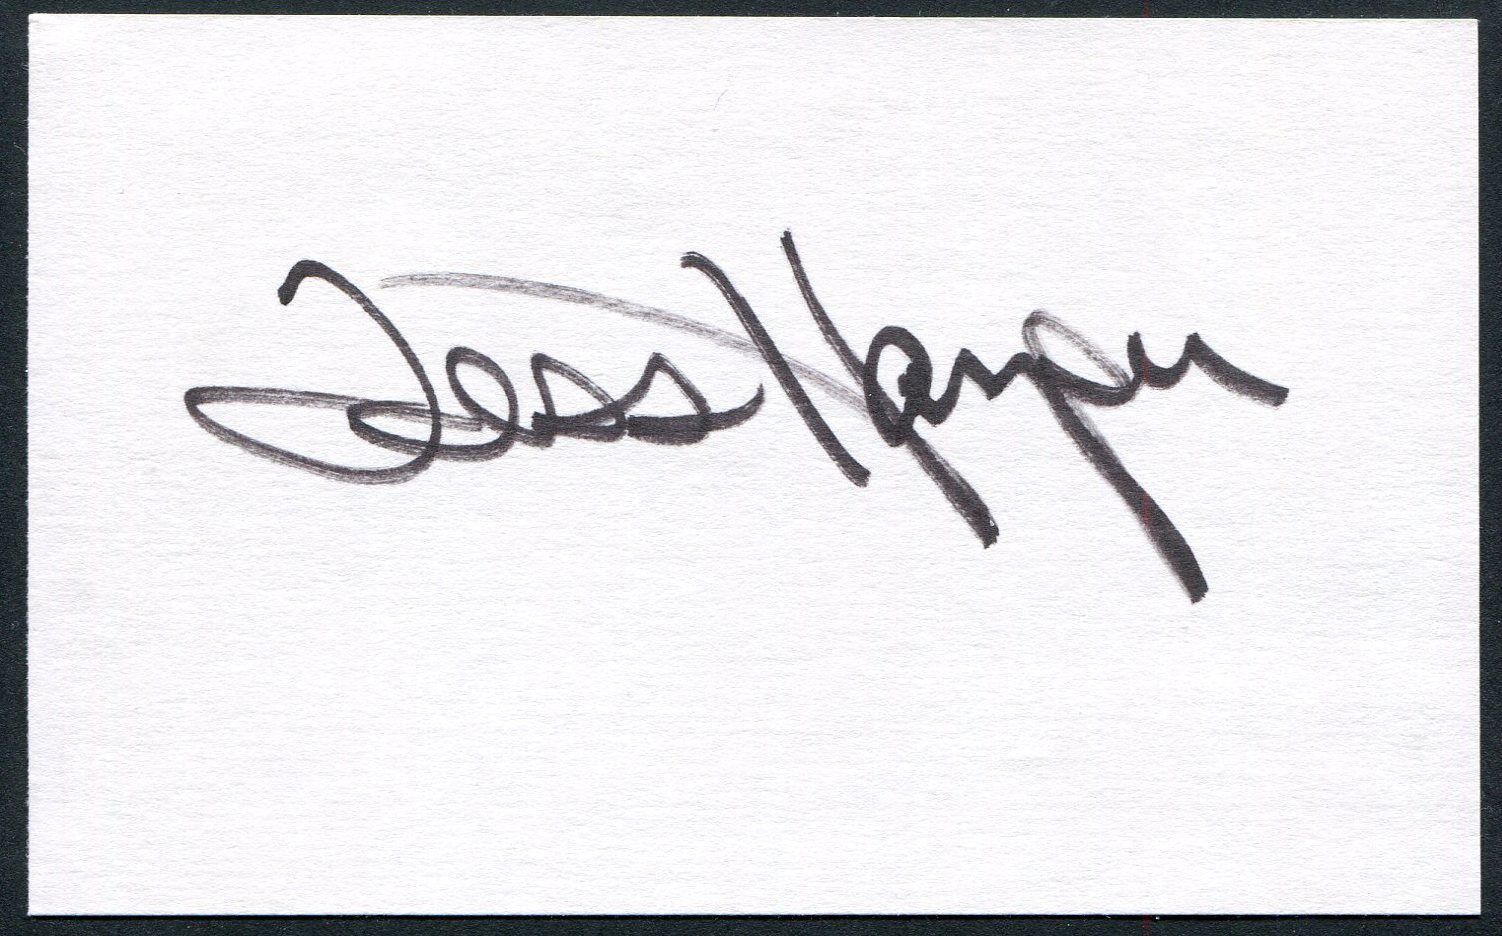 Primary image for TESS HARPER SIGNED 3X5 INDEX CARD TENDER MERCIES CRIMES OF HEART BREAKING BAD